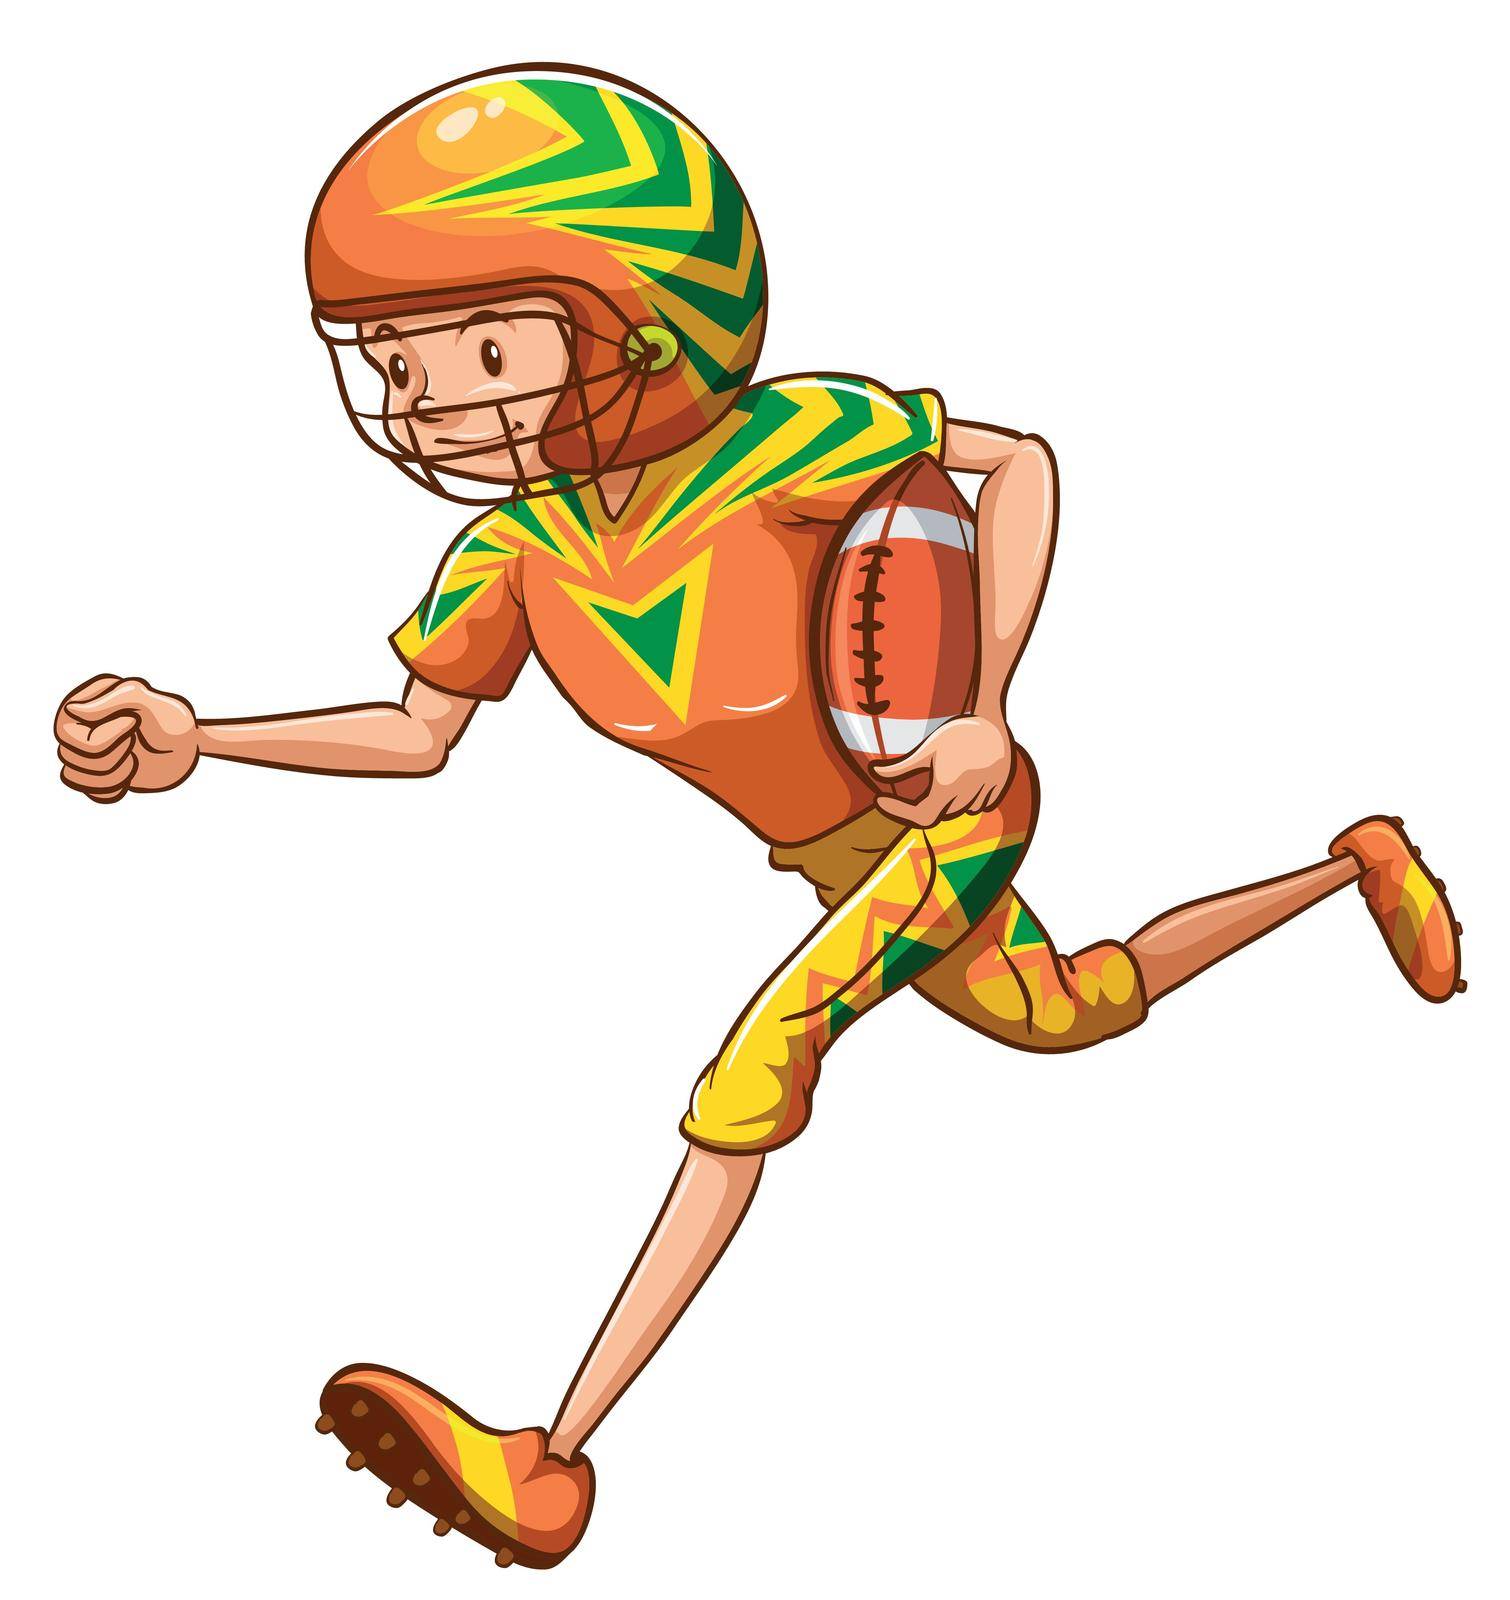 Illustration of an energetic American football player on a white background